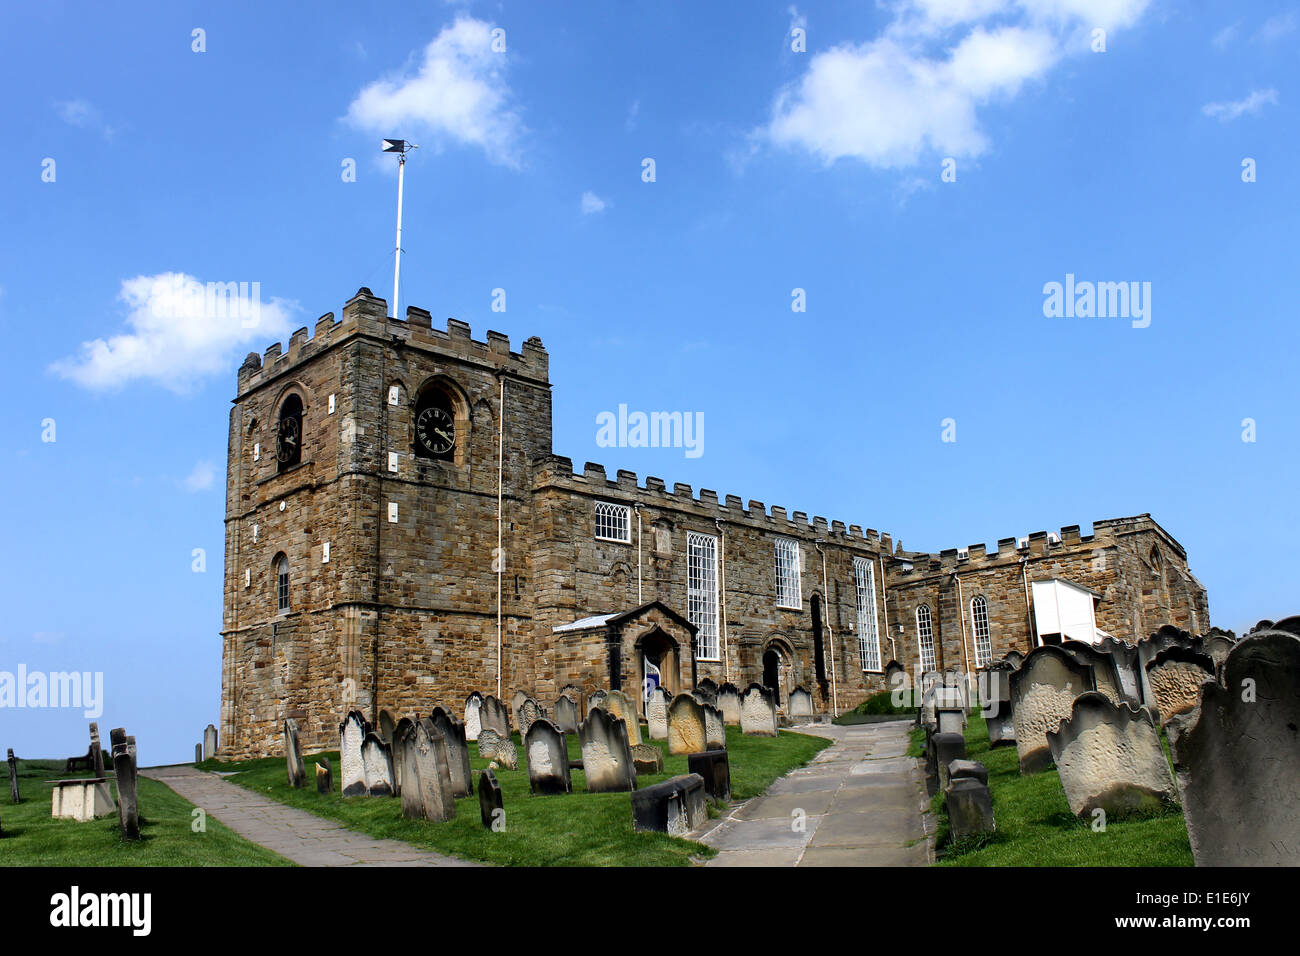 Saint Marie chiesa a Whitby. North Yorkshire, Inghilterra. Foto Stock